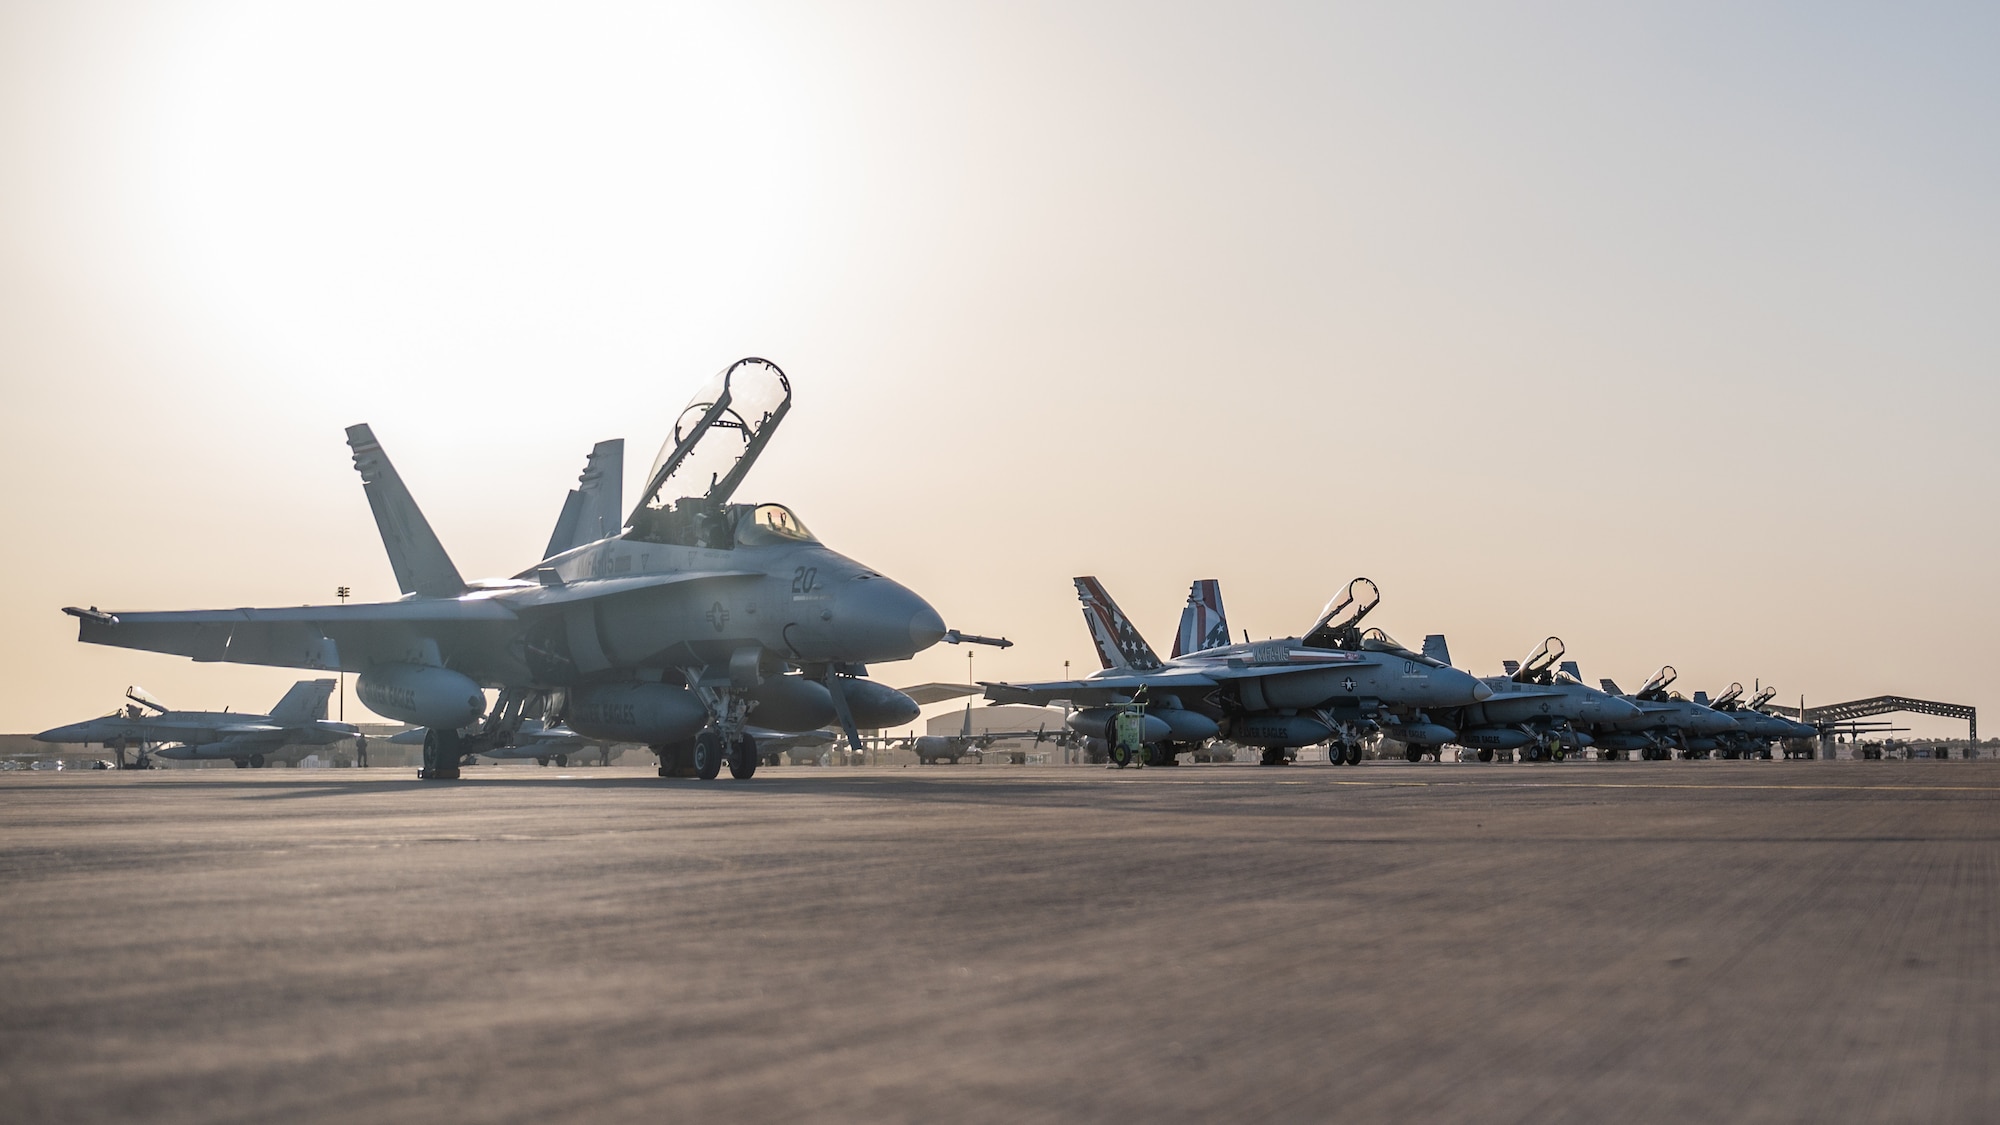 U.S. Marine F/A-18 Hornets from the Marine Fighter Attack Squadron 115 sit on the flight line at Prince Sultan Air Base, Kingdom of Saudi Arabia, Dec. 23, 2021. The arrival of the VMFA-115 is a key addition to PSAB as it prepares and postures U.S. and coalition forces to span the full range of combat effectiveness. (U.S. Air Force photo by Senior Airman Jacob B. Wrightsman)